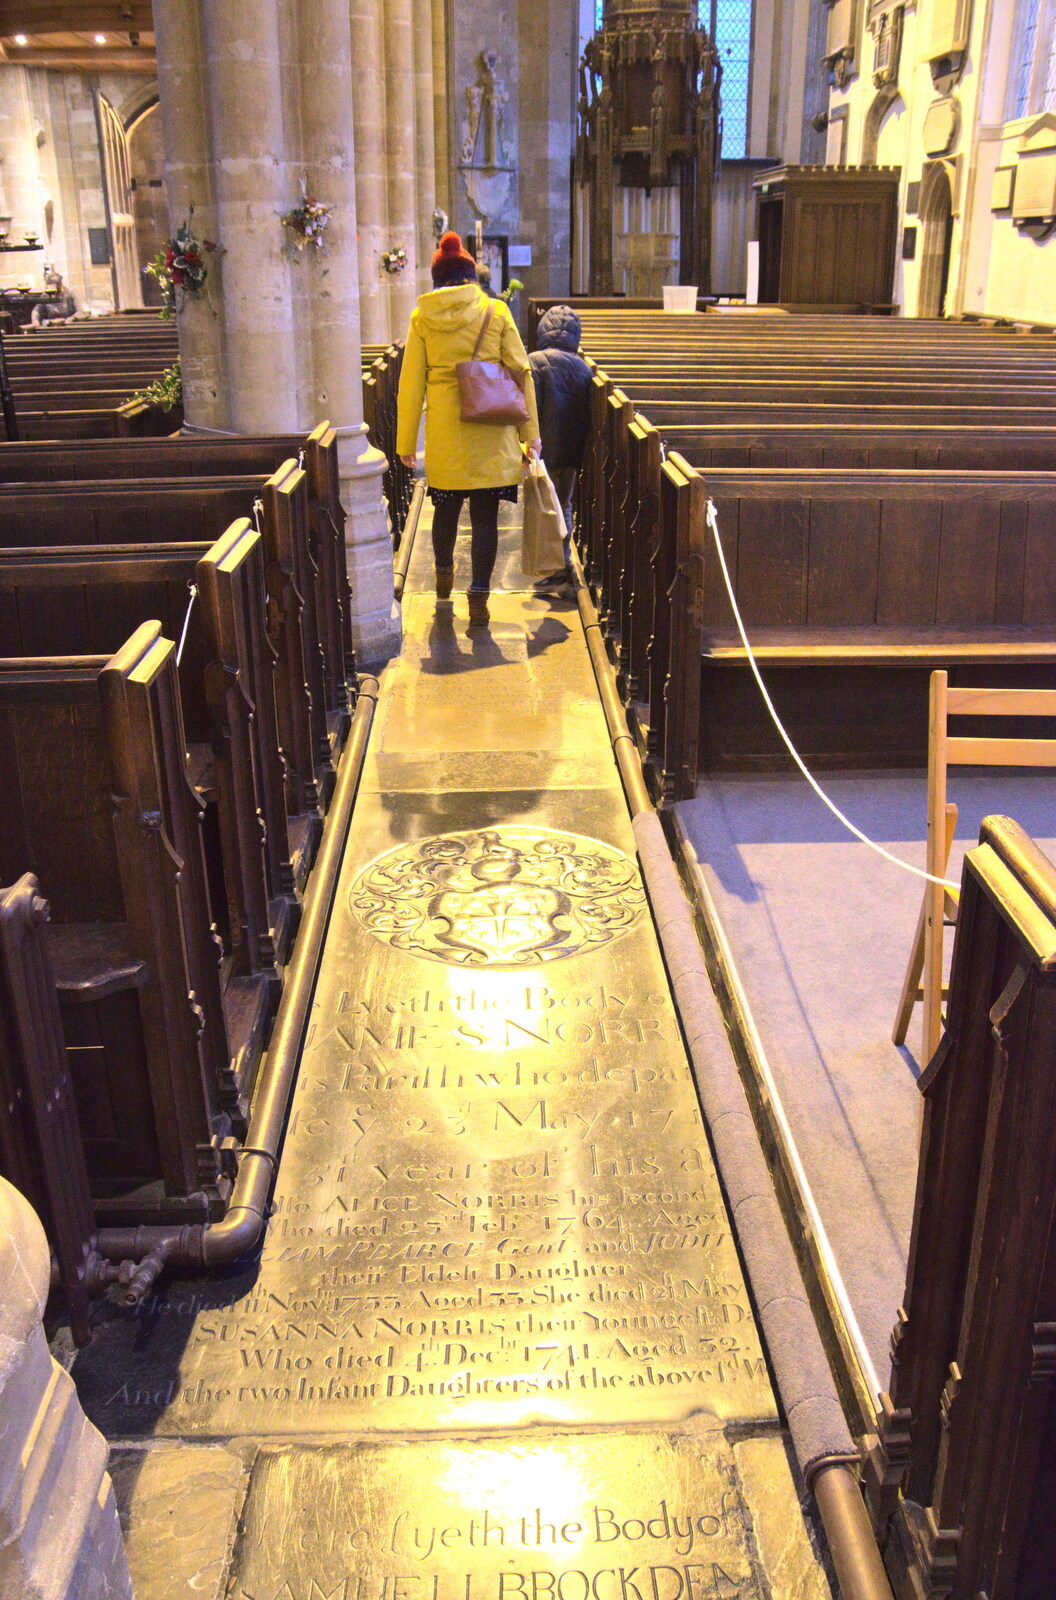 Some very shiny brass memorials on the floor from A Bit of Christmas Shopping, Norwich, Norfolk - 23rd December 2020